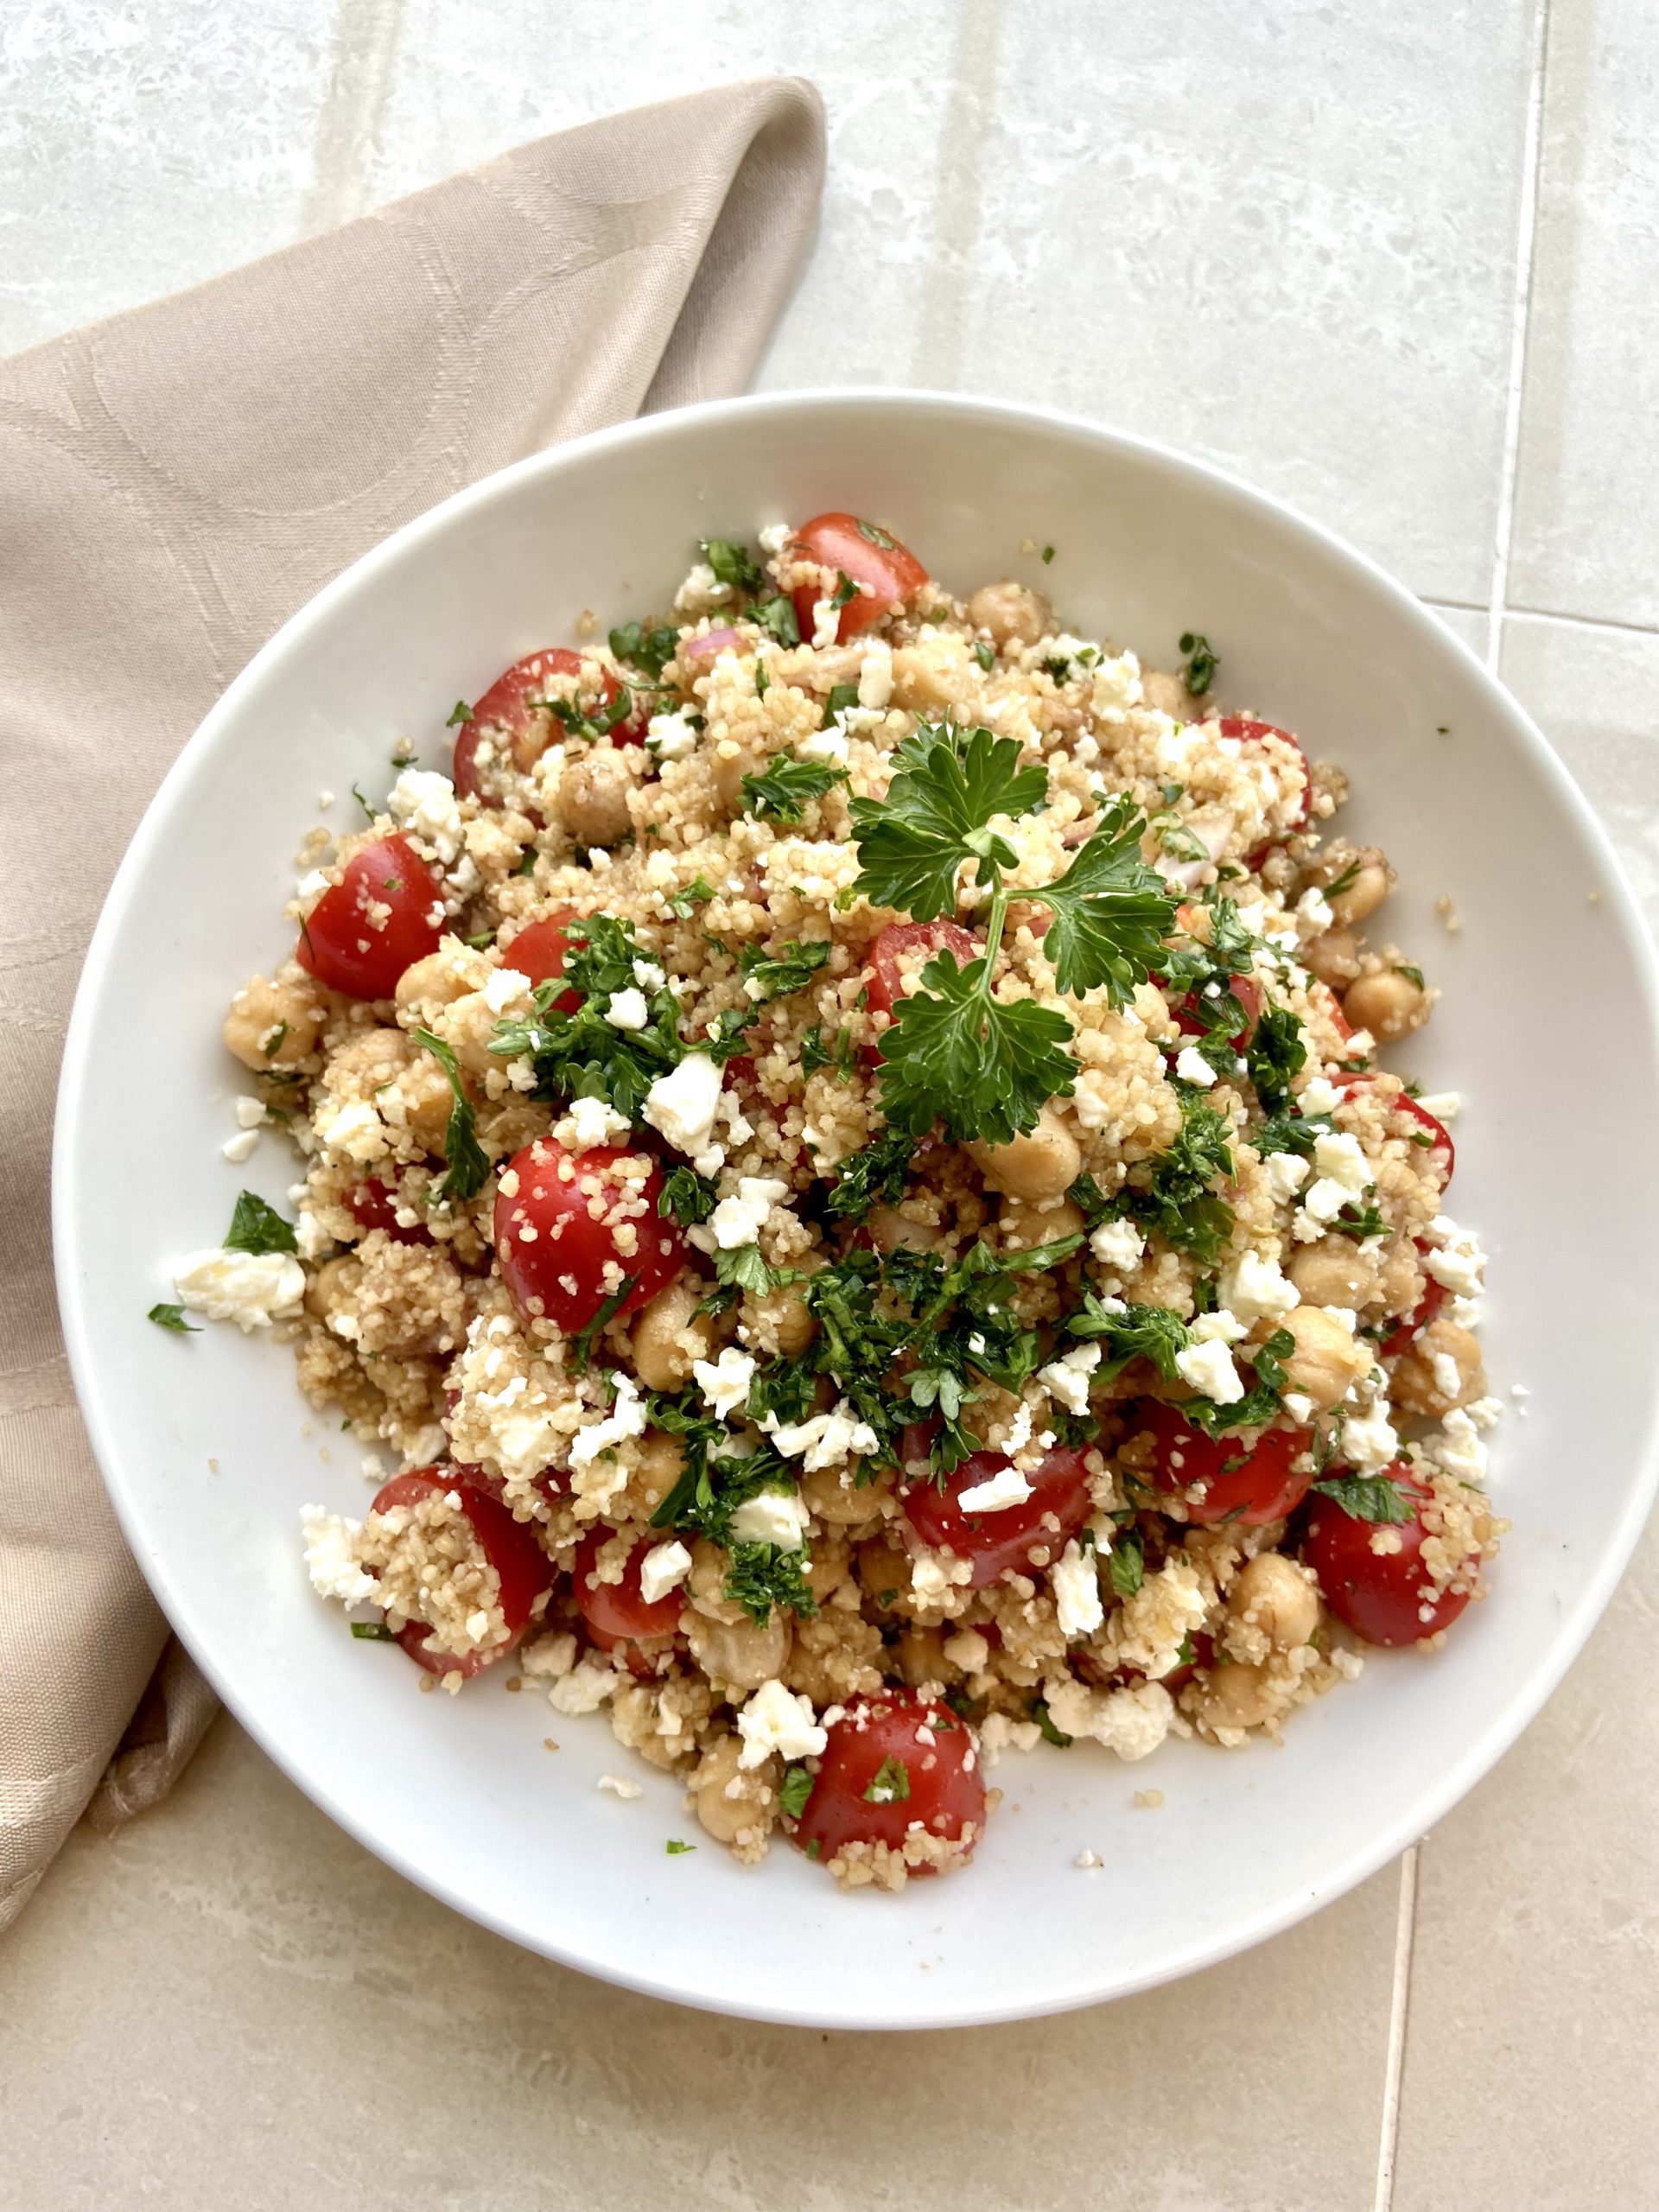 Couscous Salad With Chickpeas and Herbs